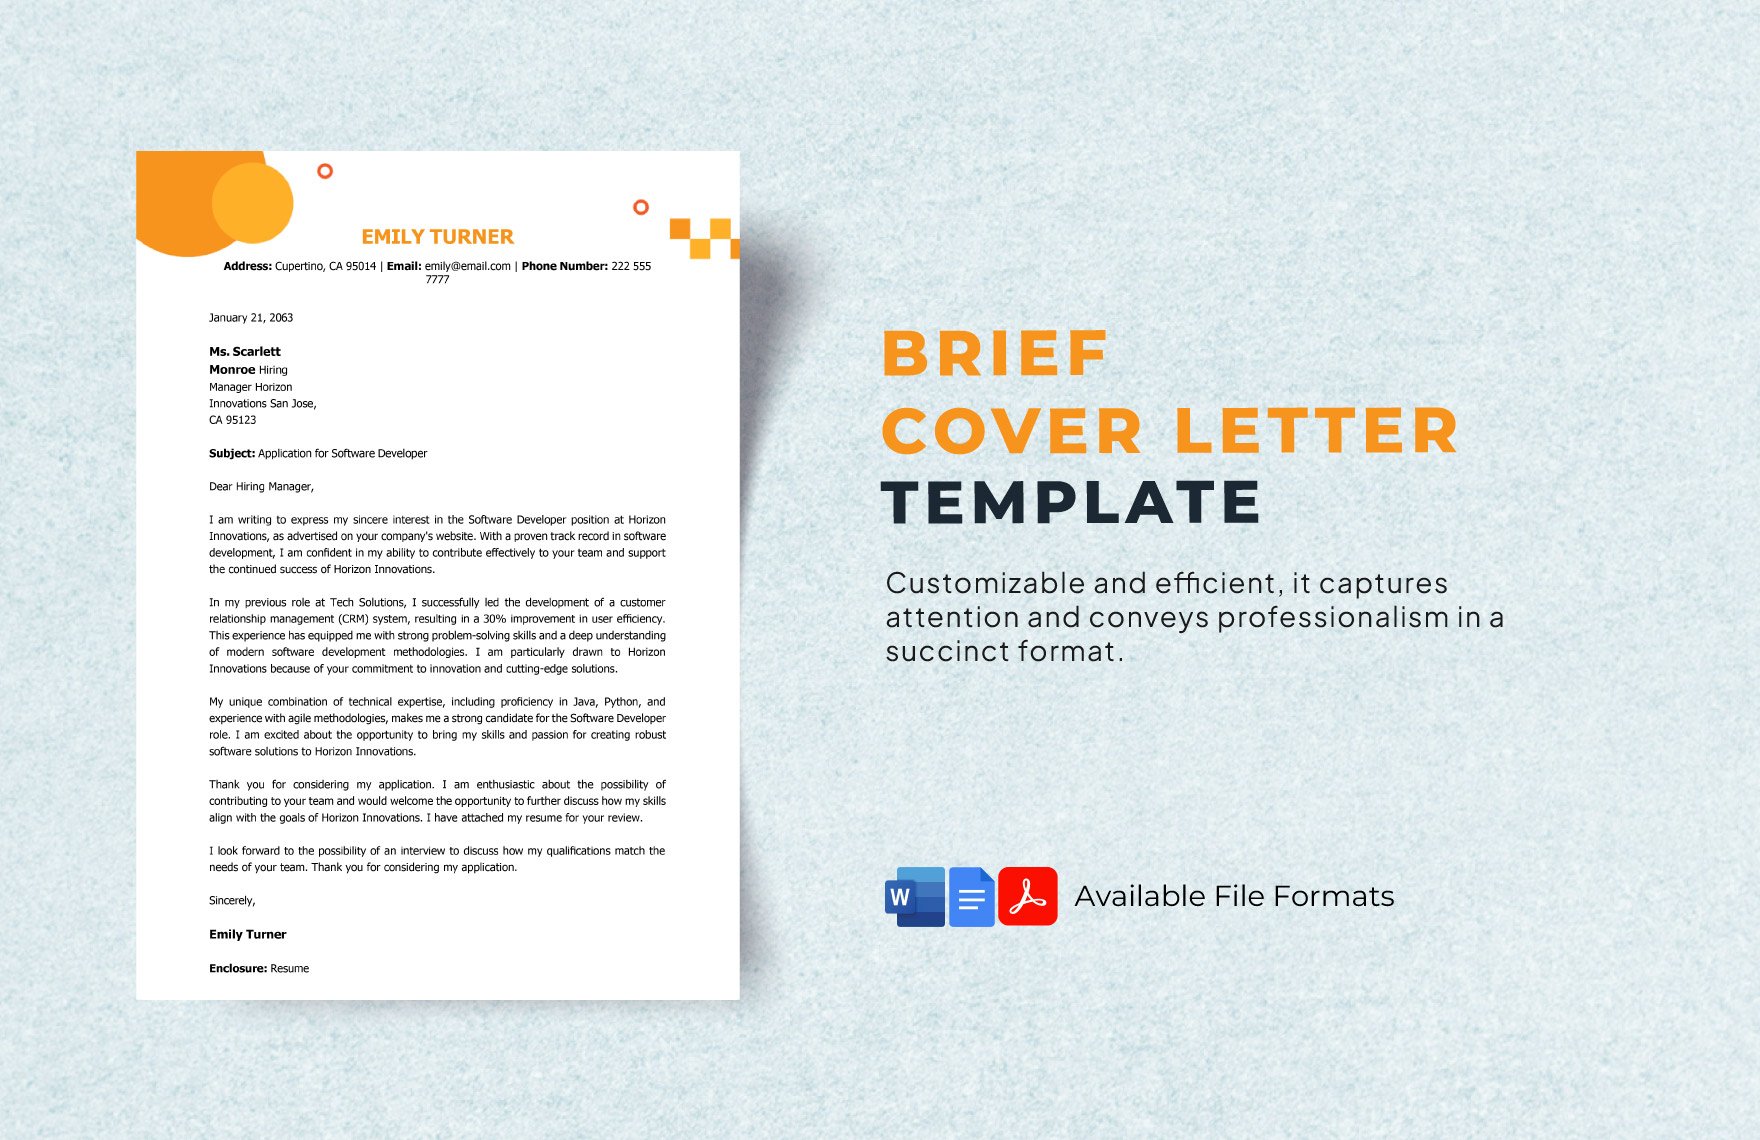 Brief Cover Letter Template